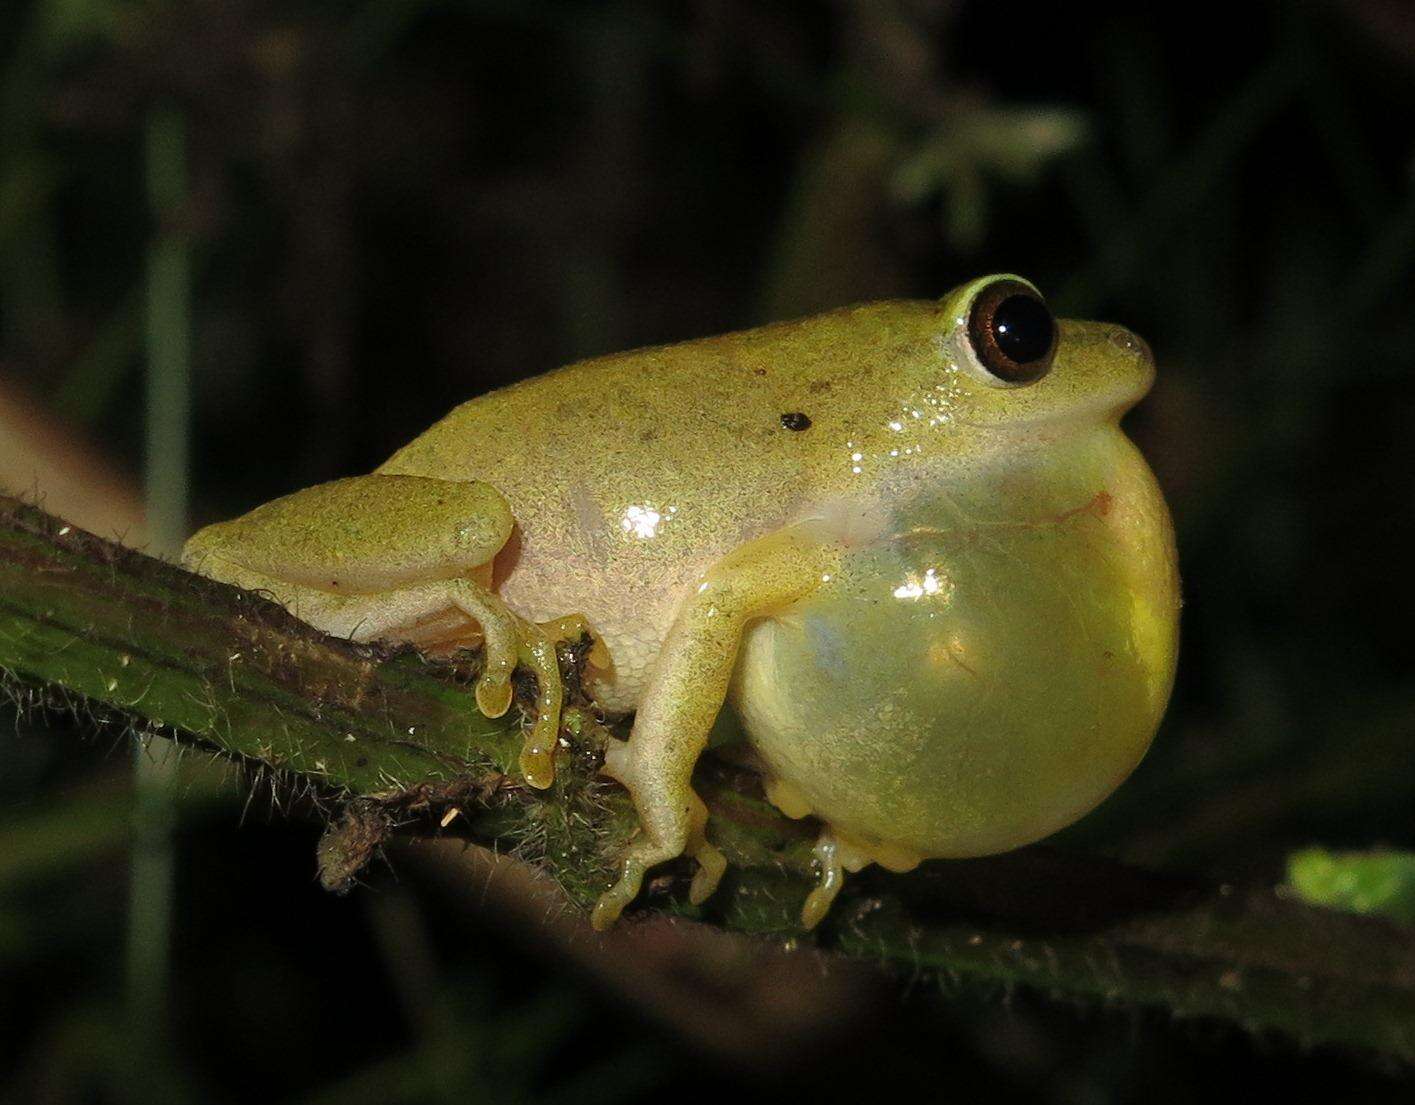 Image of Argus Reed Frog